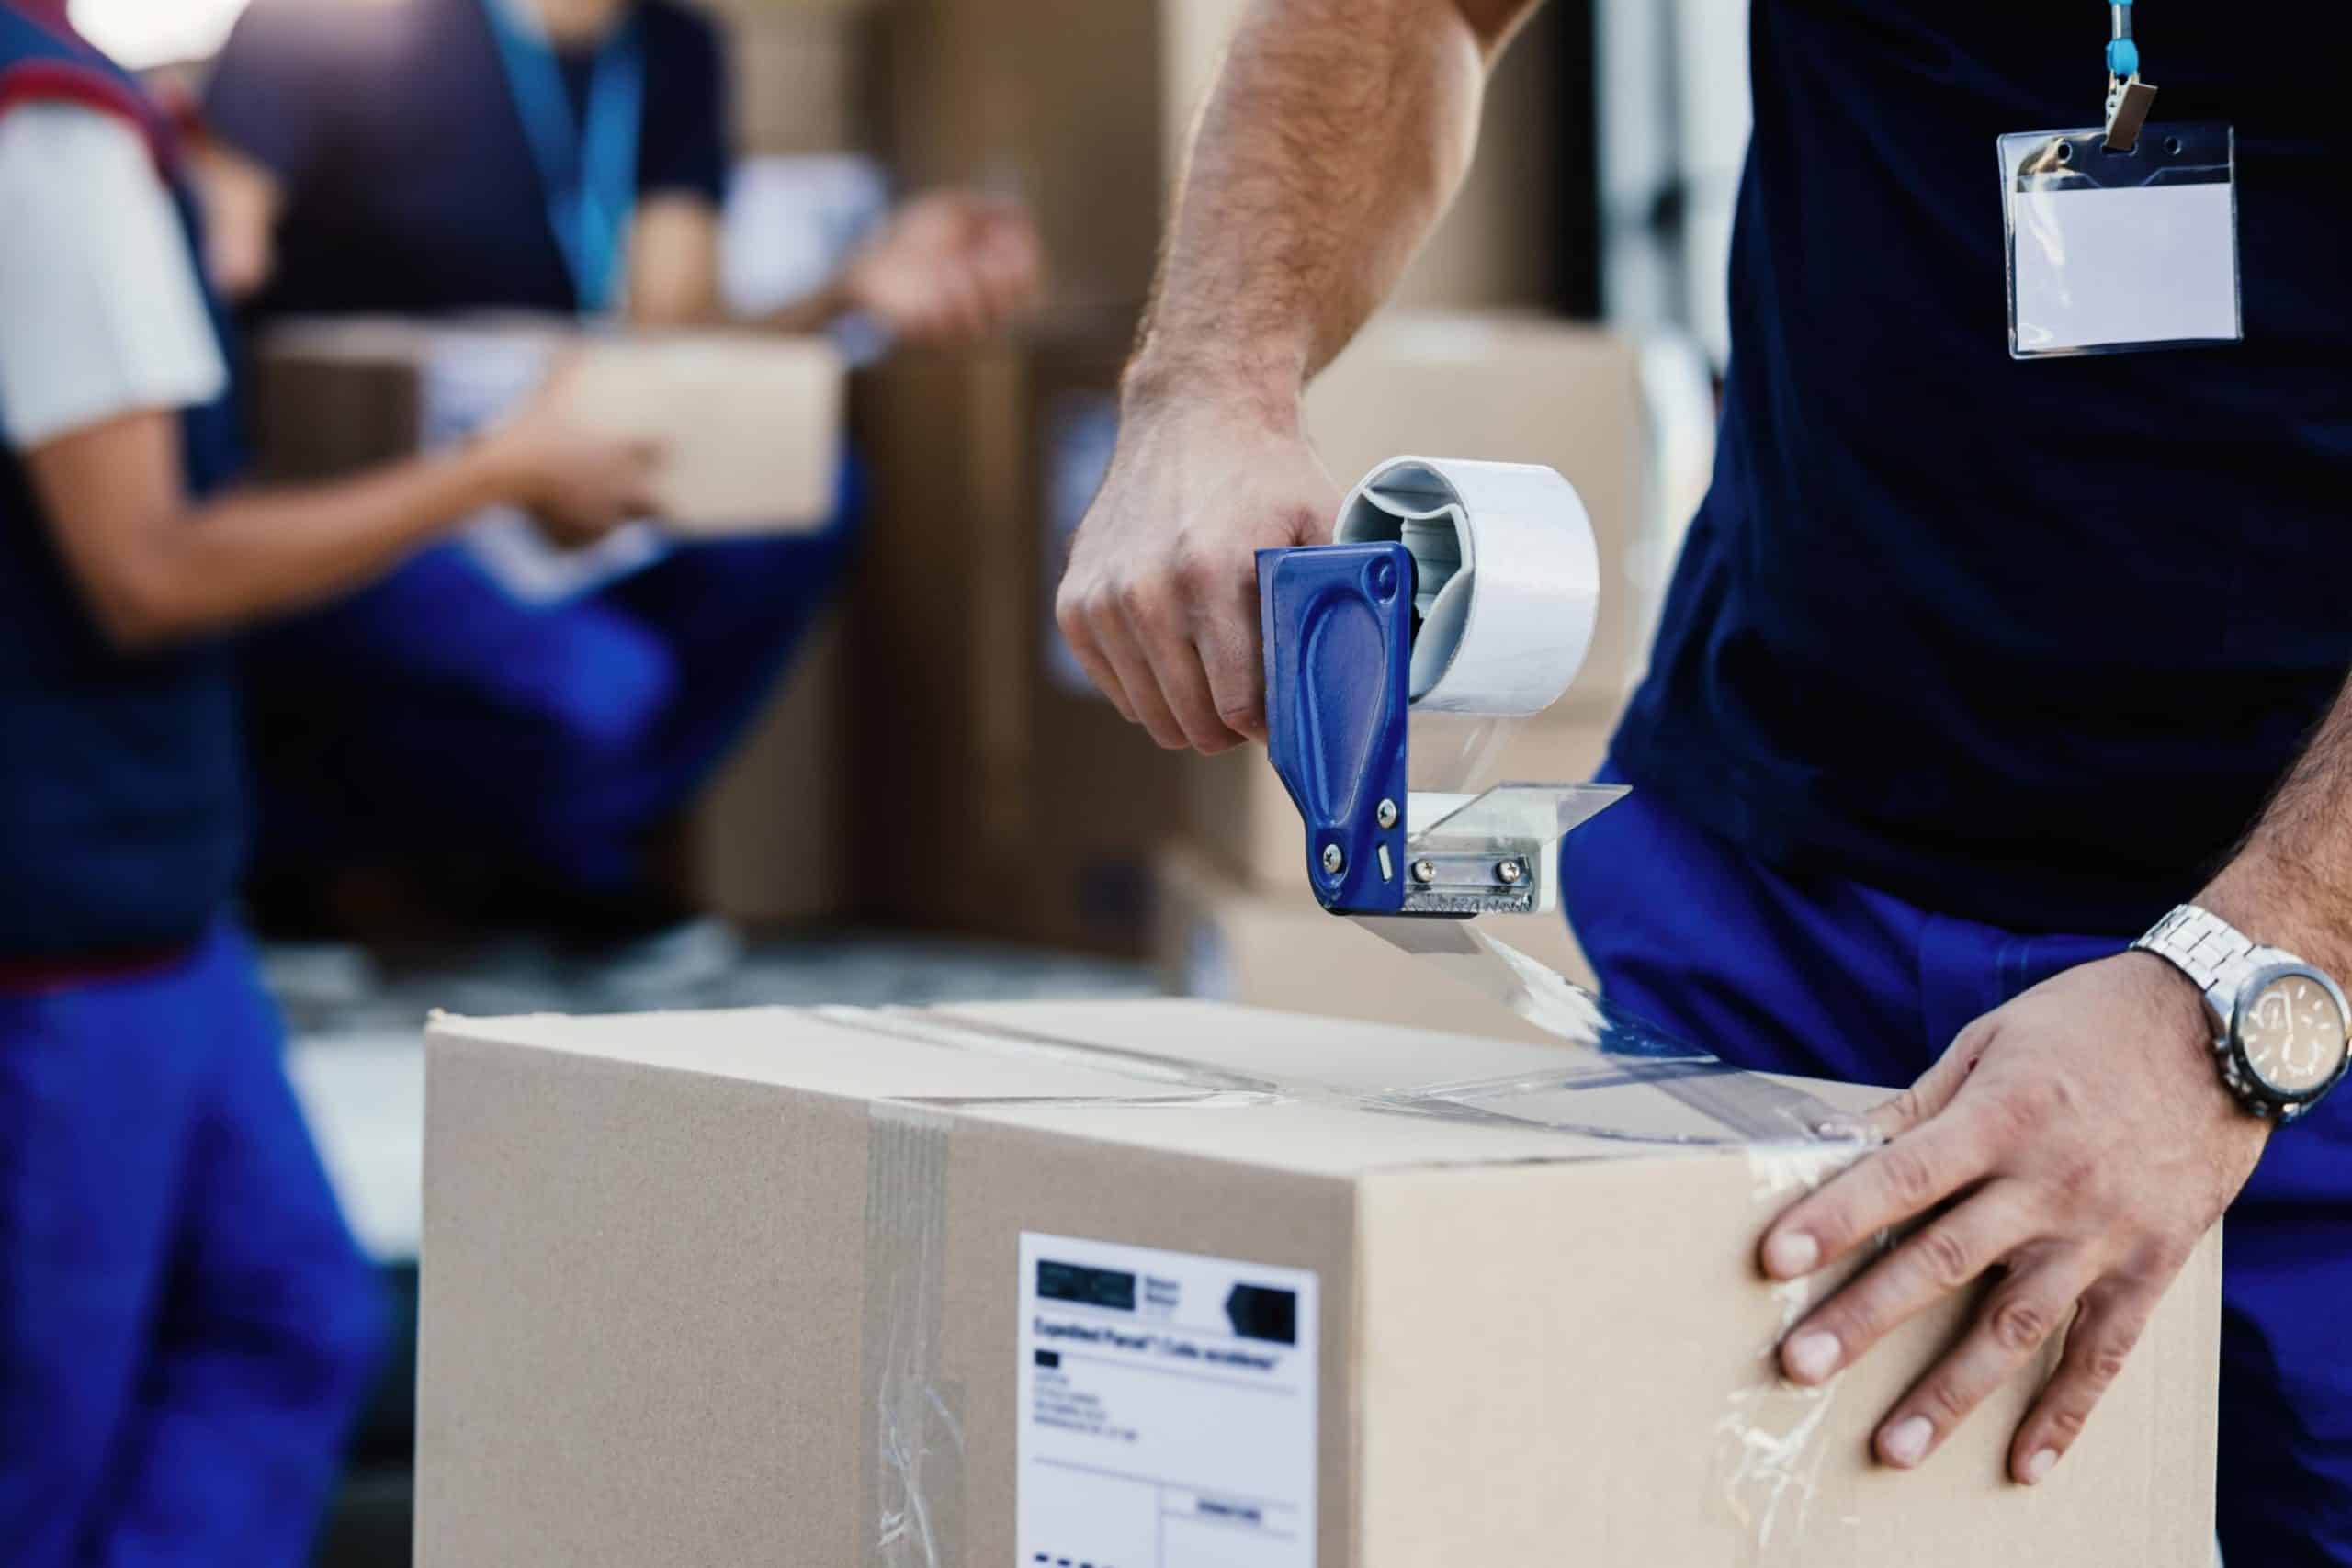 Shipping Packages to Customers: What You Can’t Forget About when Utilizing a Fulfillment Center in the UK